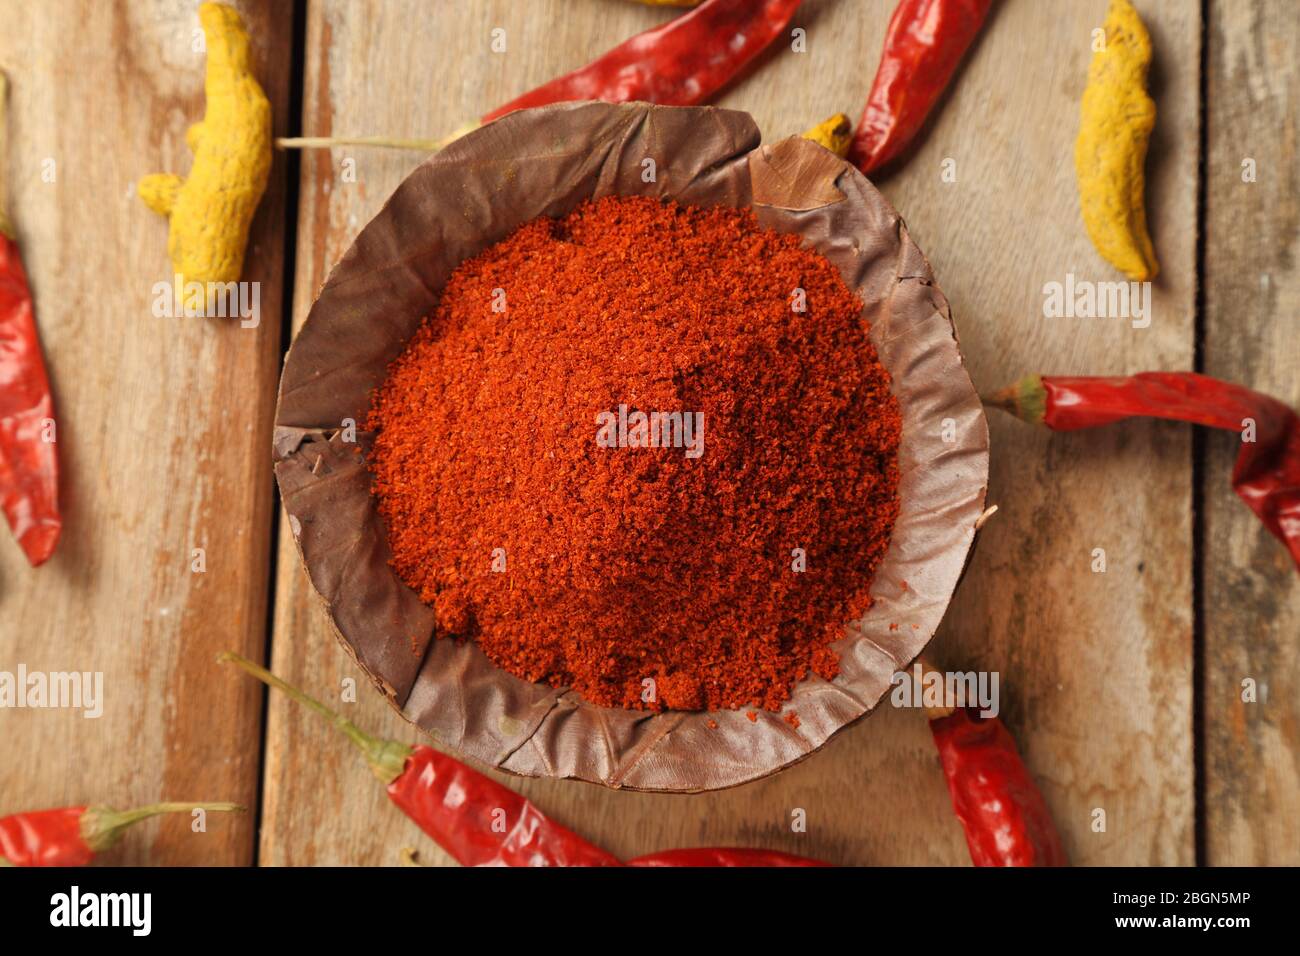 Indian style spices and herbs. Red chili powder in a handmade dry leaves bowl. Stock Photo